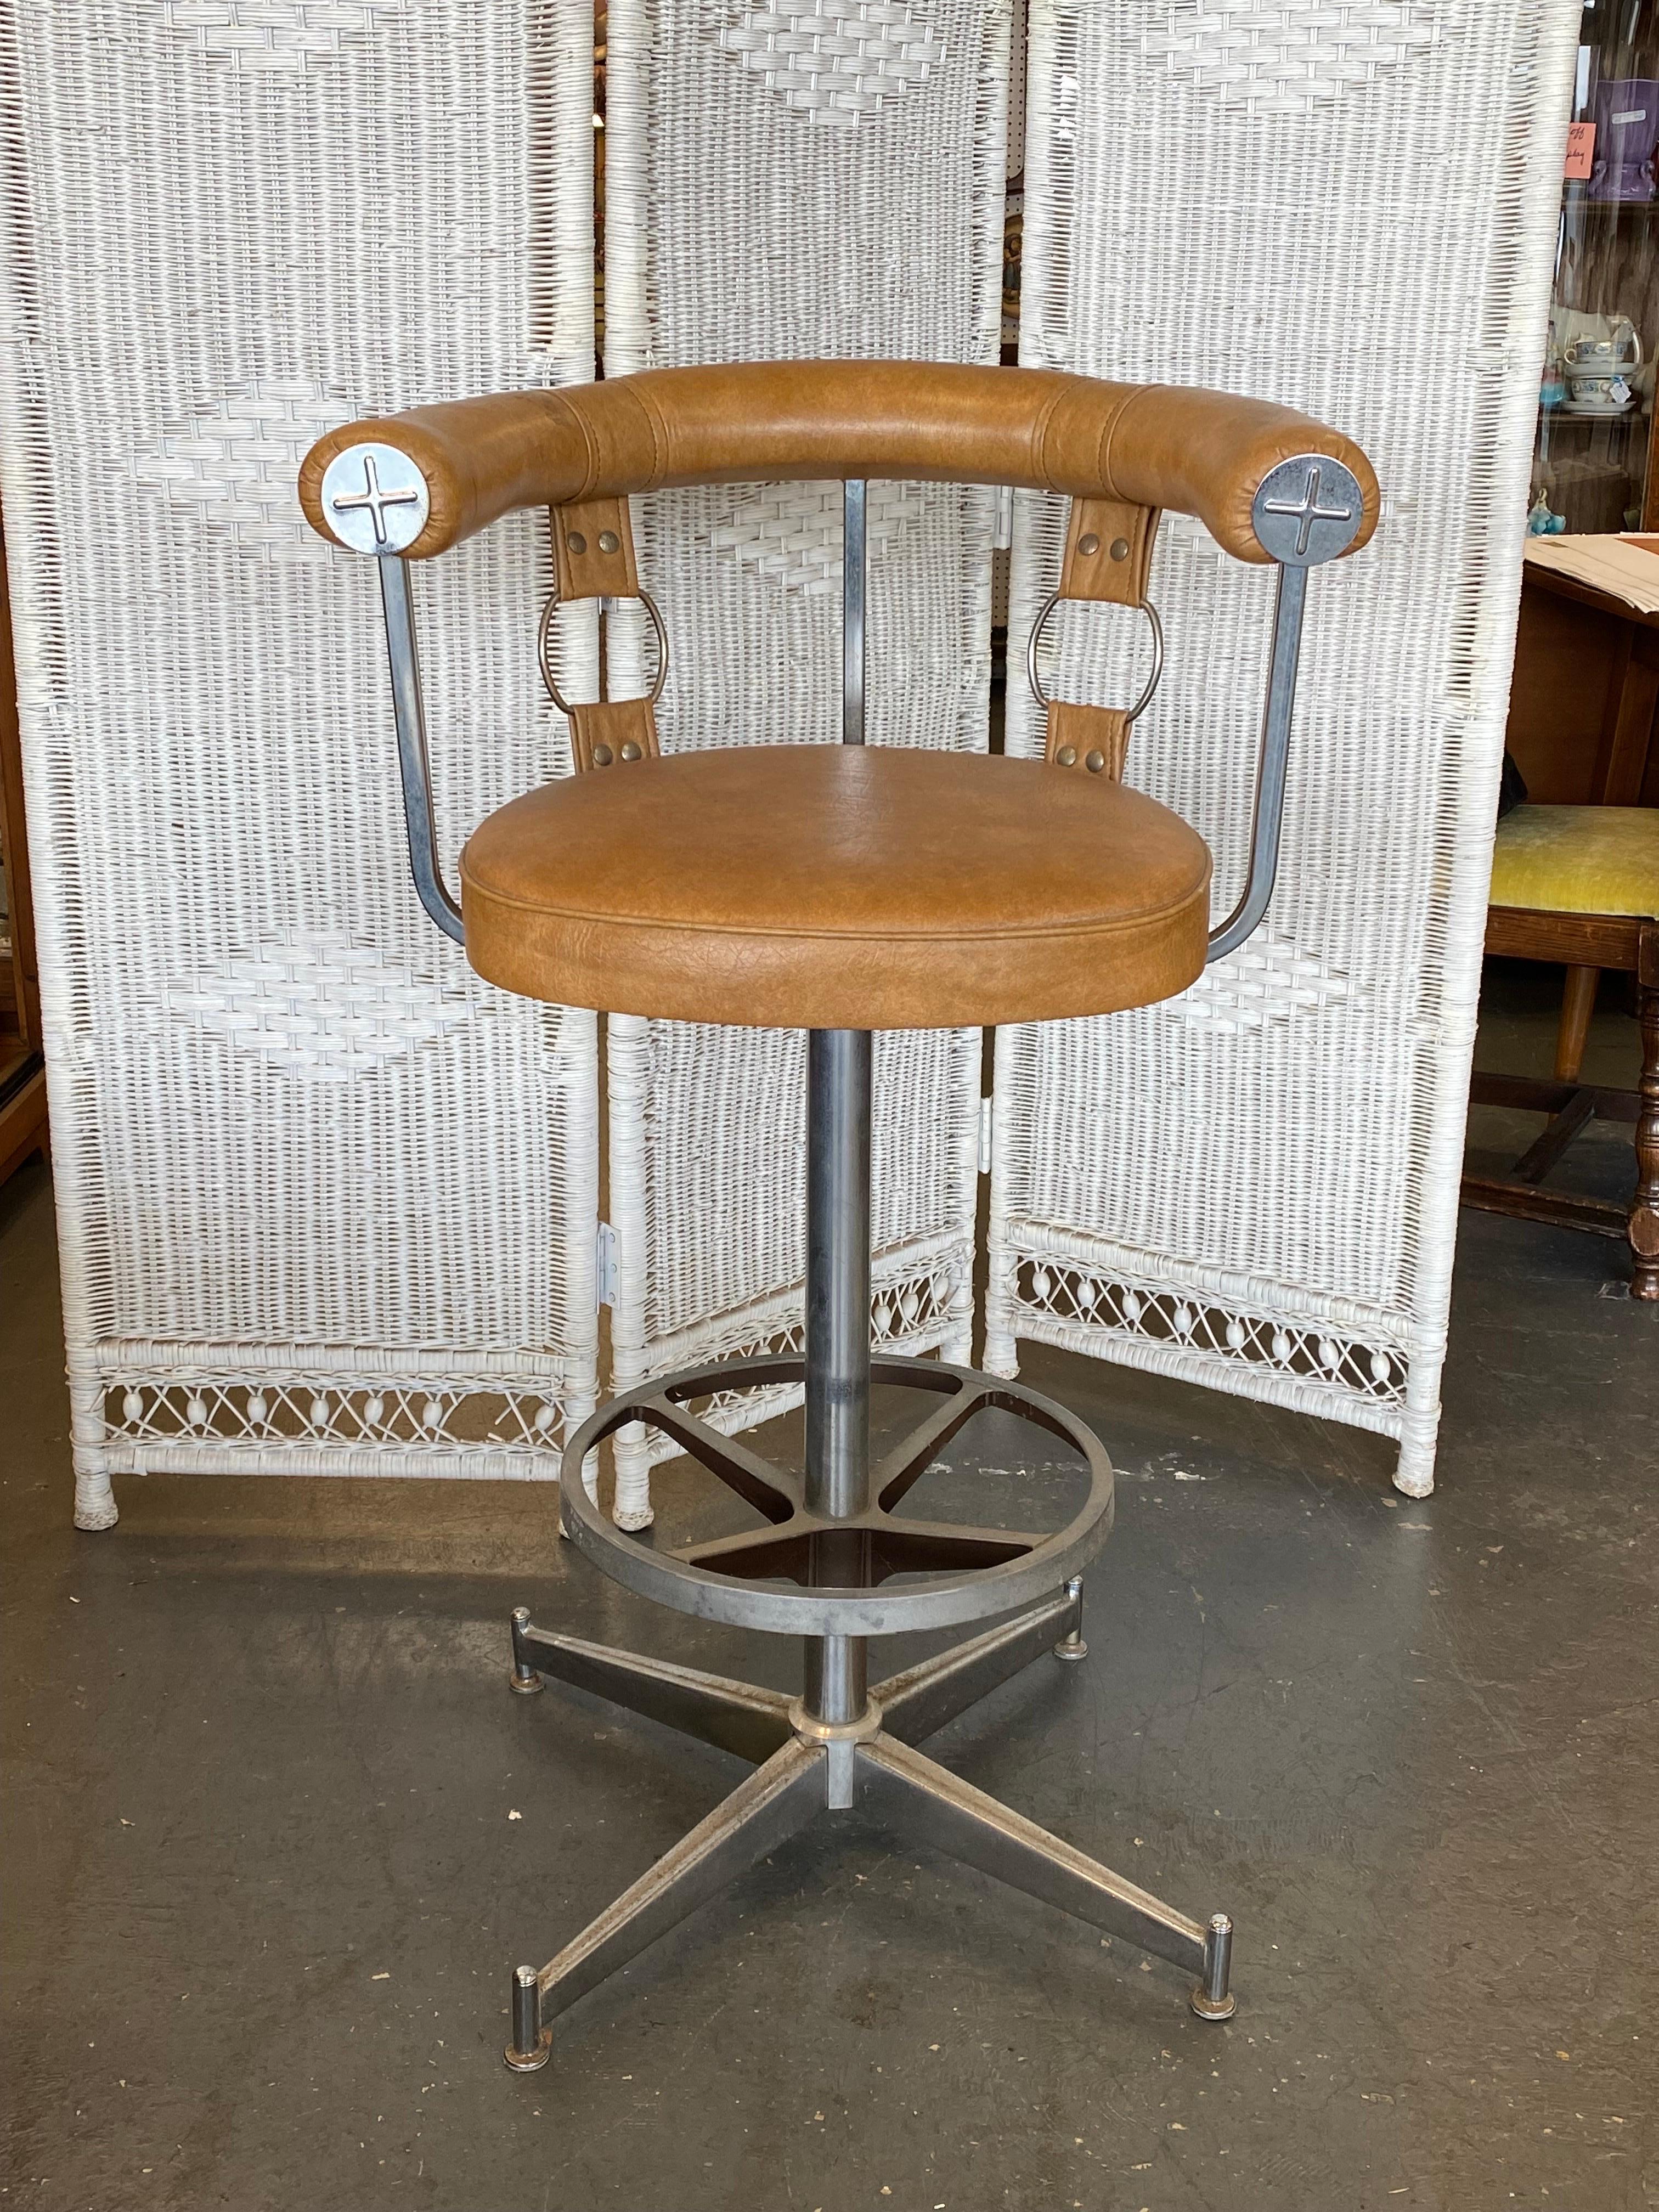 Cool 1970's caramel colored faux leather or vinyl covered bar stool with chrome accents. This bar stool was made in the USA by the Daystrom Furniture Company. 

This is a cool piece of 1970's furniture that will look awesome wherever